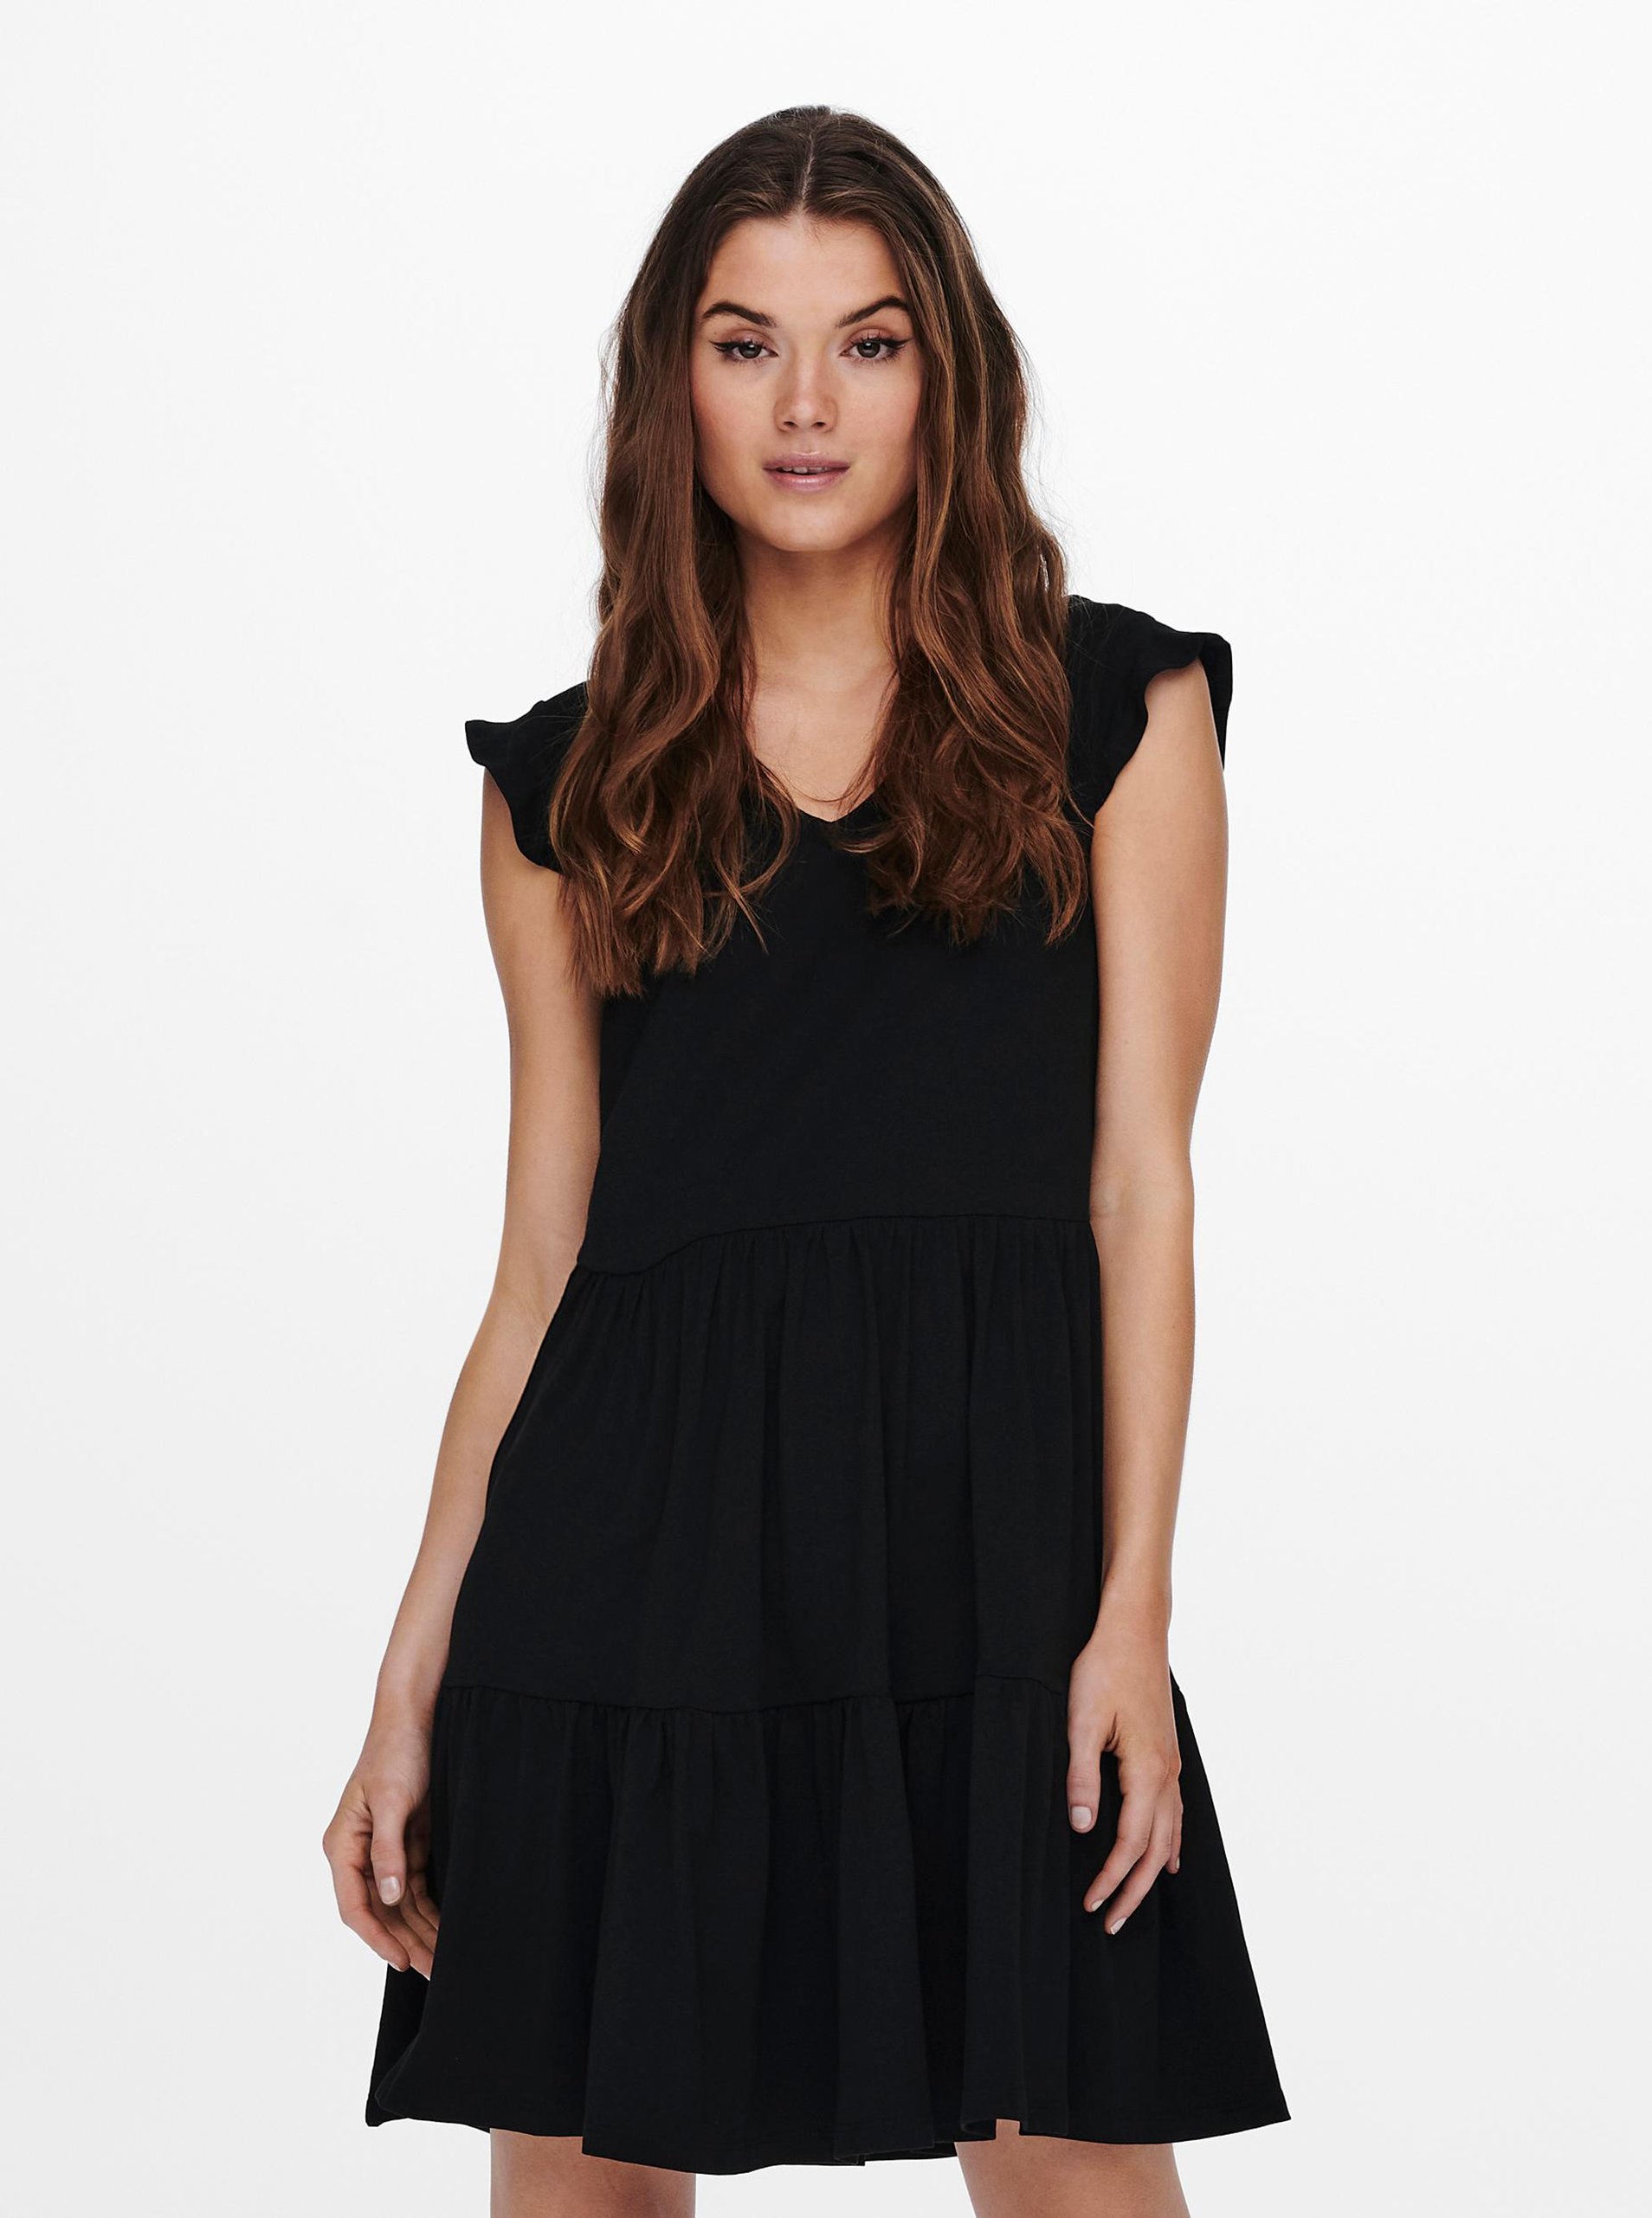 Black dress ONLY May - Women